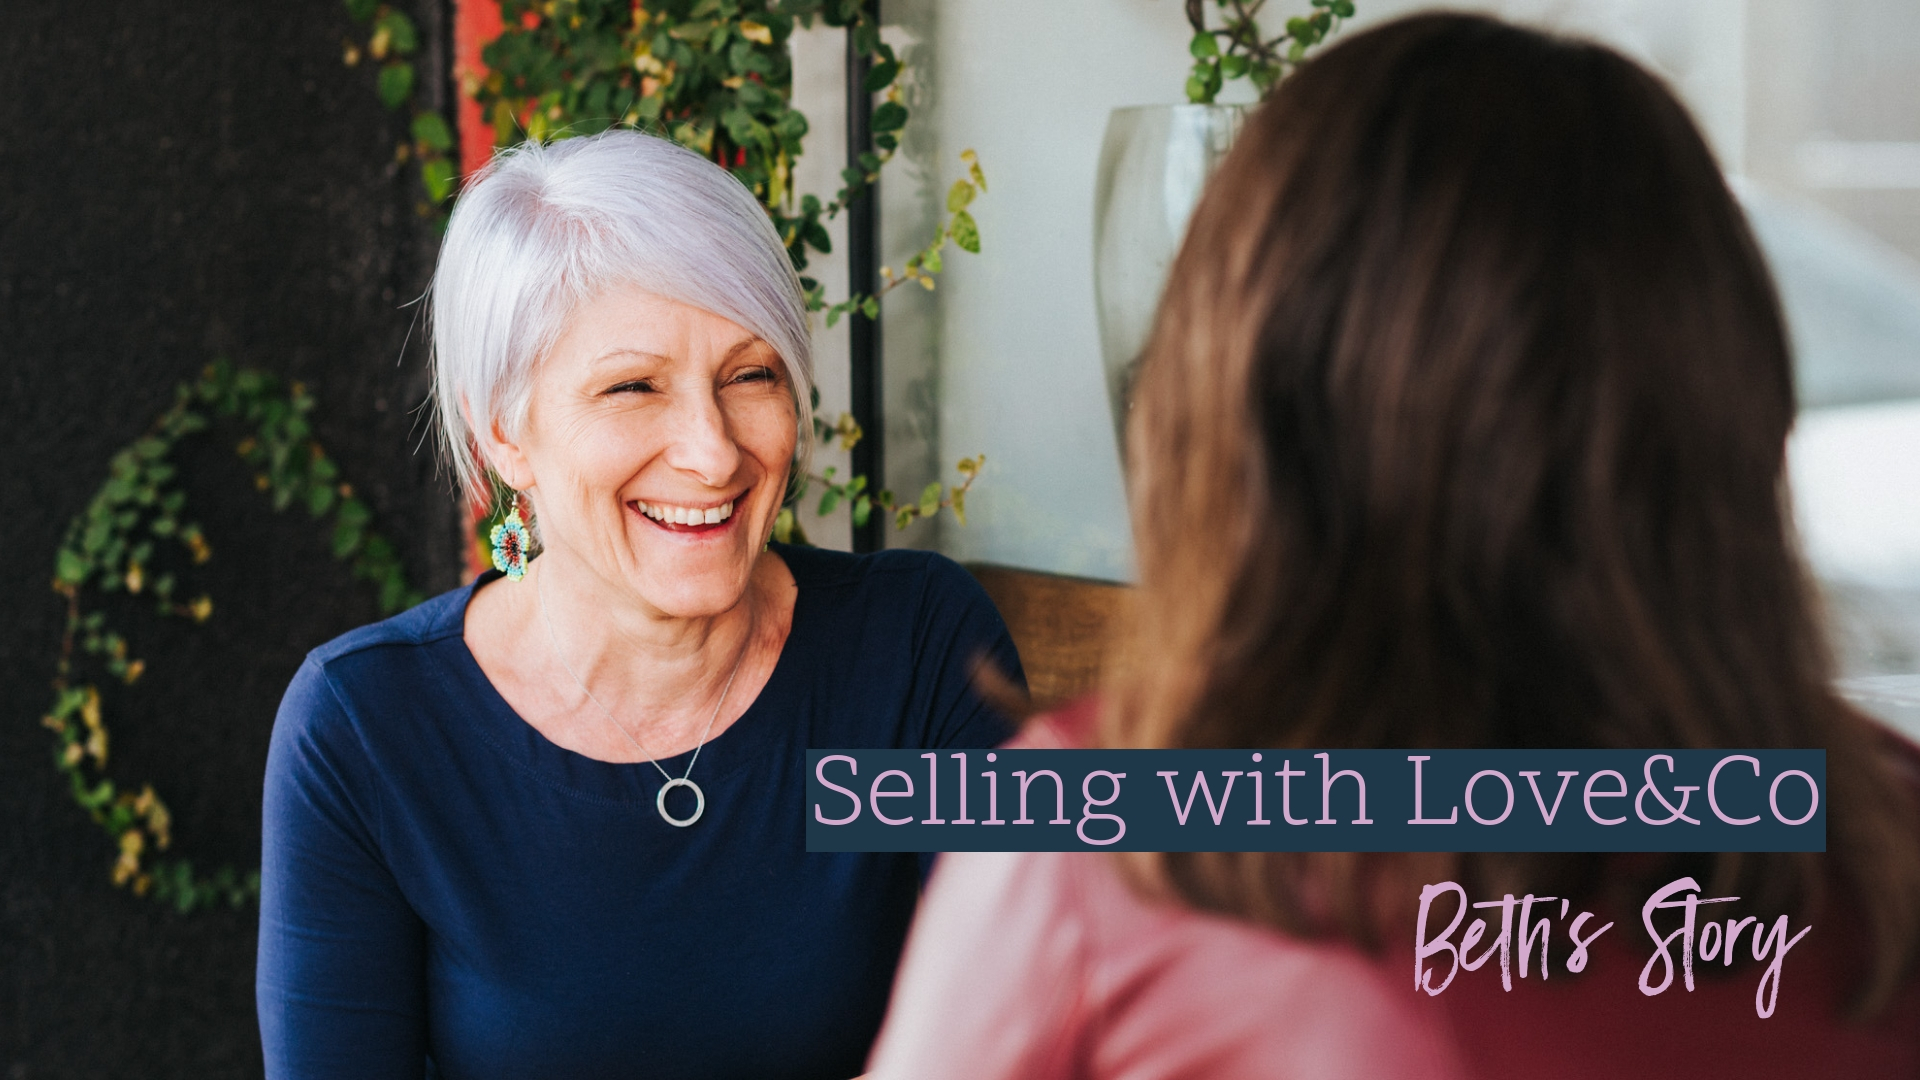 Selling with Love&Co: Beth's Story